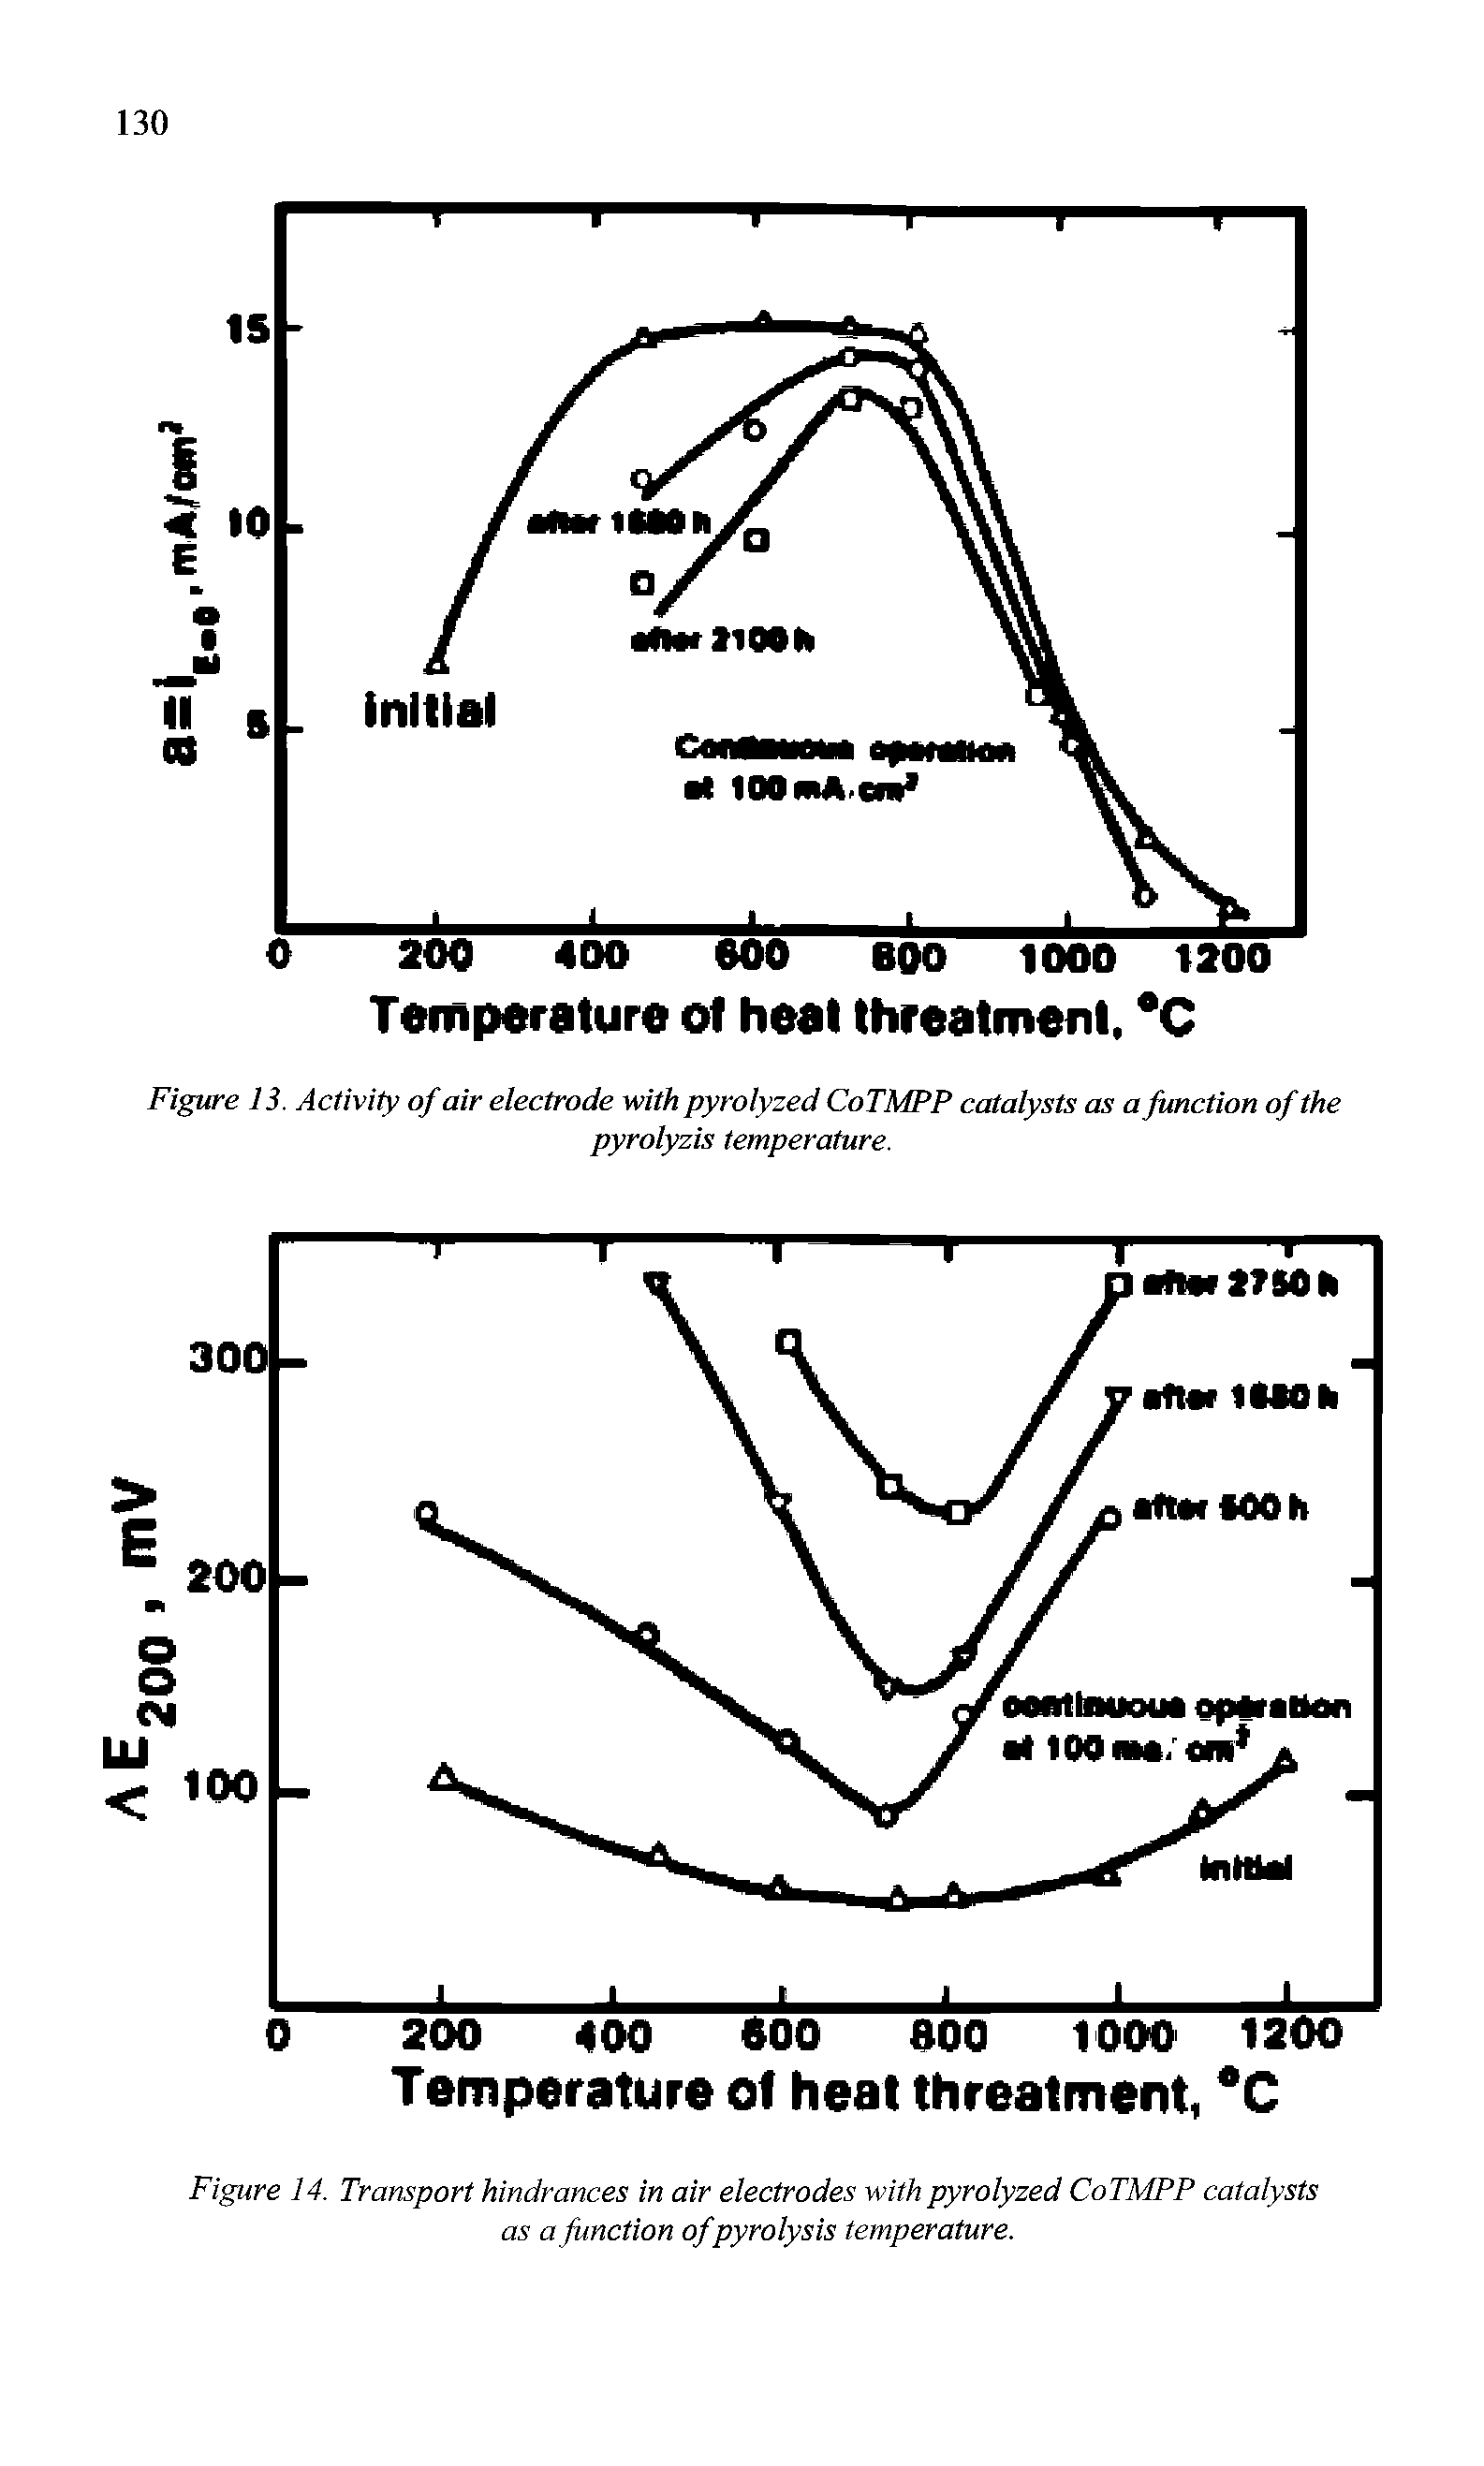 Figure 14. Transport hindrances in air electrodes with pyrolyzed CoTMPP catalysts as a function of pyrolysis temperature.